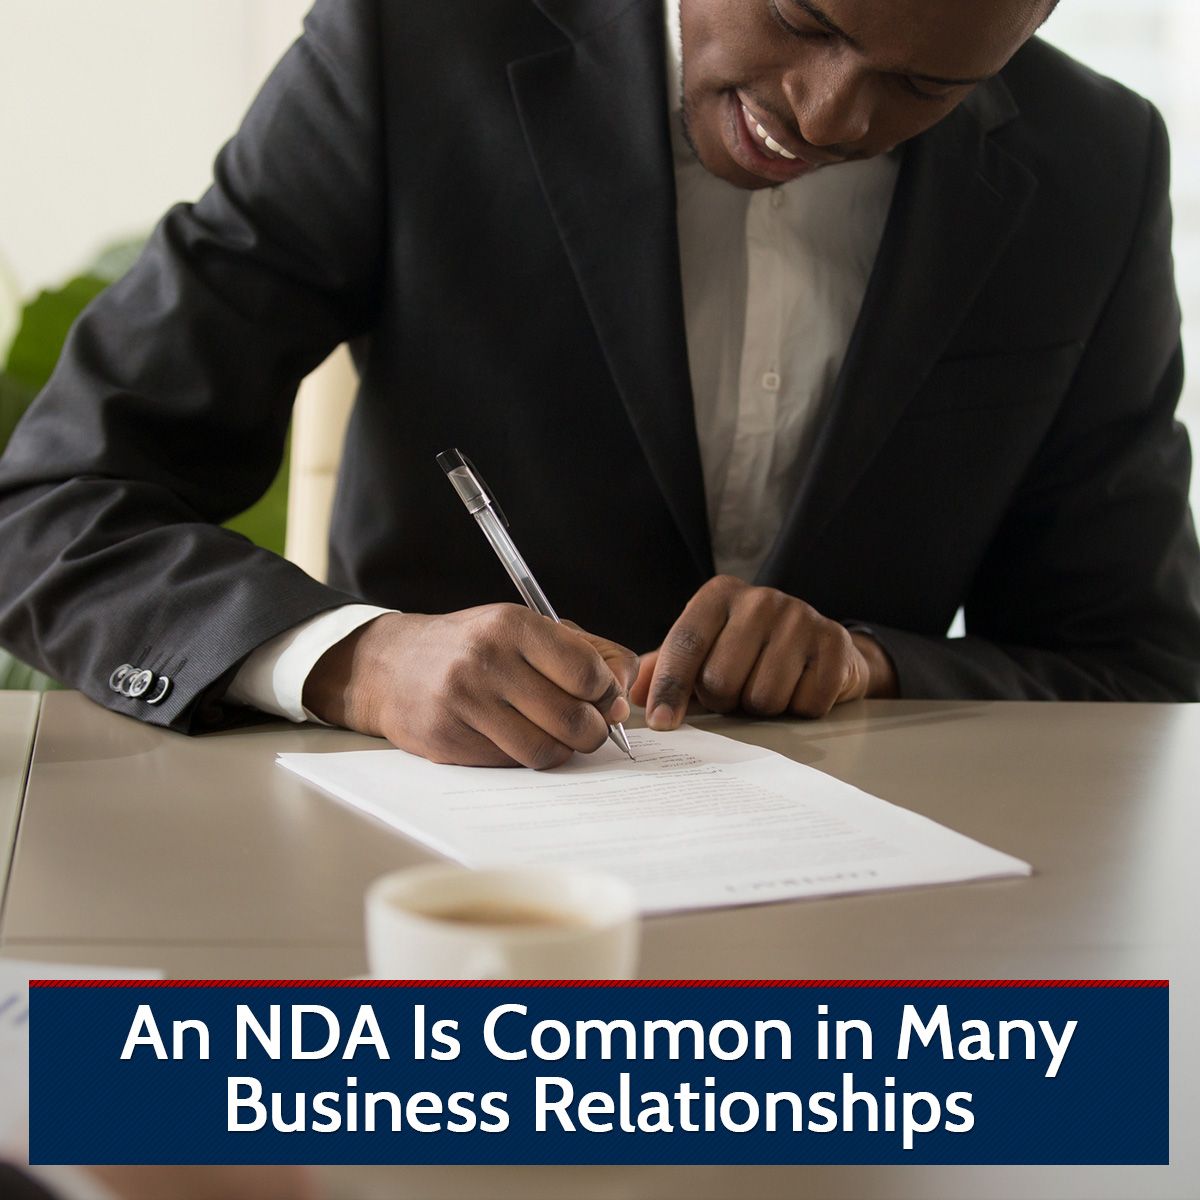 An NDA Is Common in Many Business Relationships